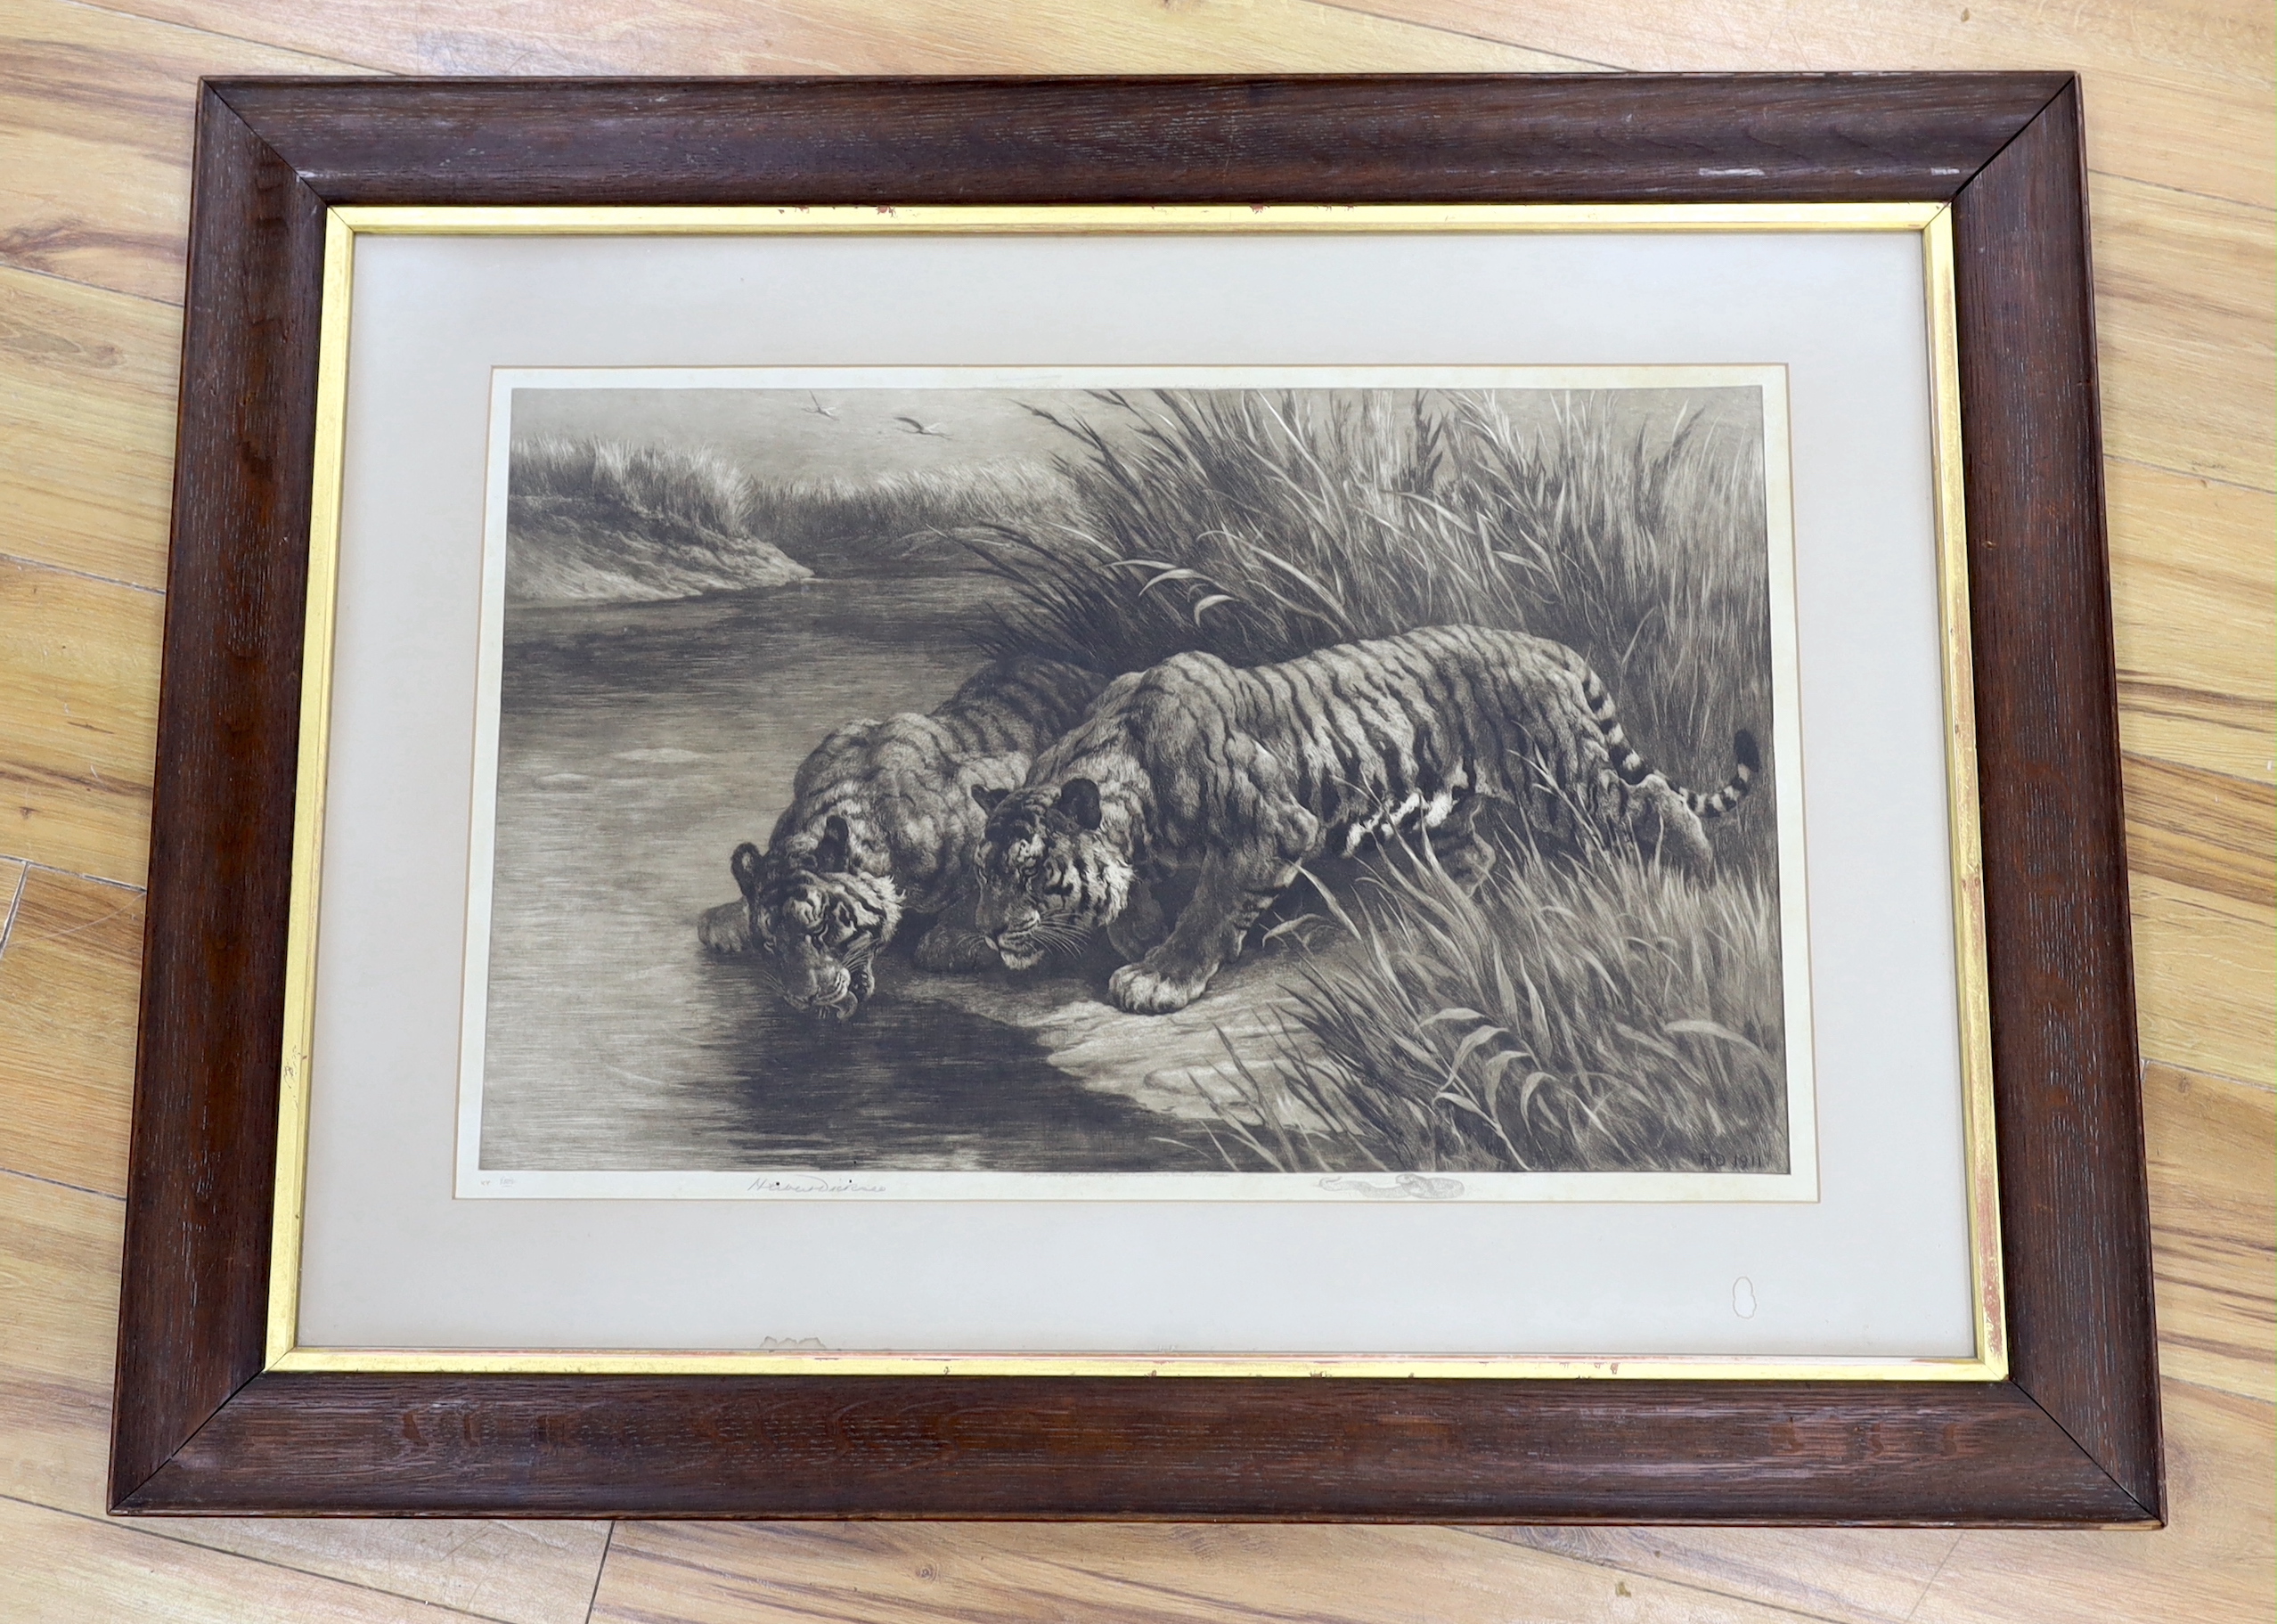 Herbert Dicksee (1862-1942), etching, 'Thirst', signed in pencil, publ. 1911, 44 x 70cm